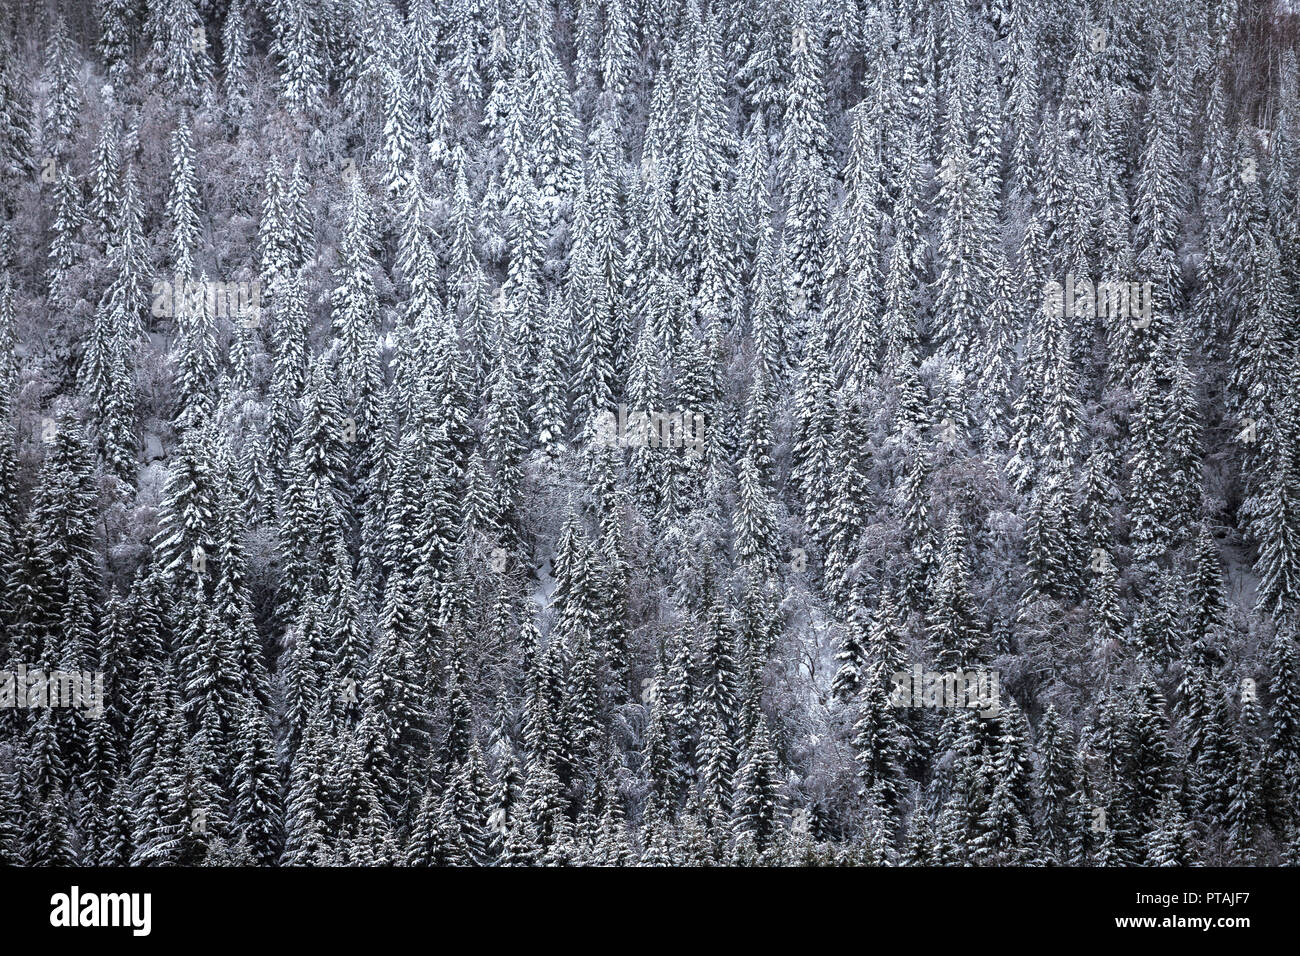 Winter forest covered by snow. Wintertime in Norway. Stock Photo